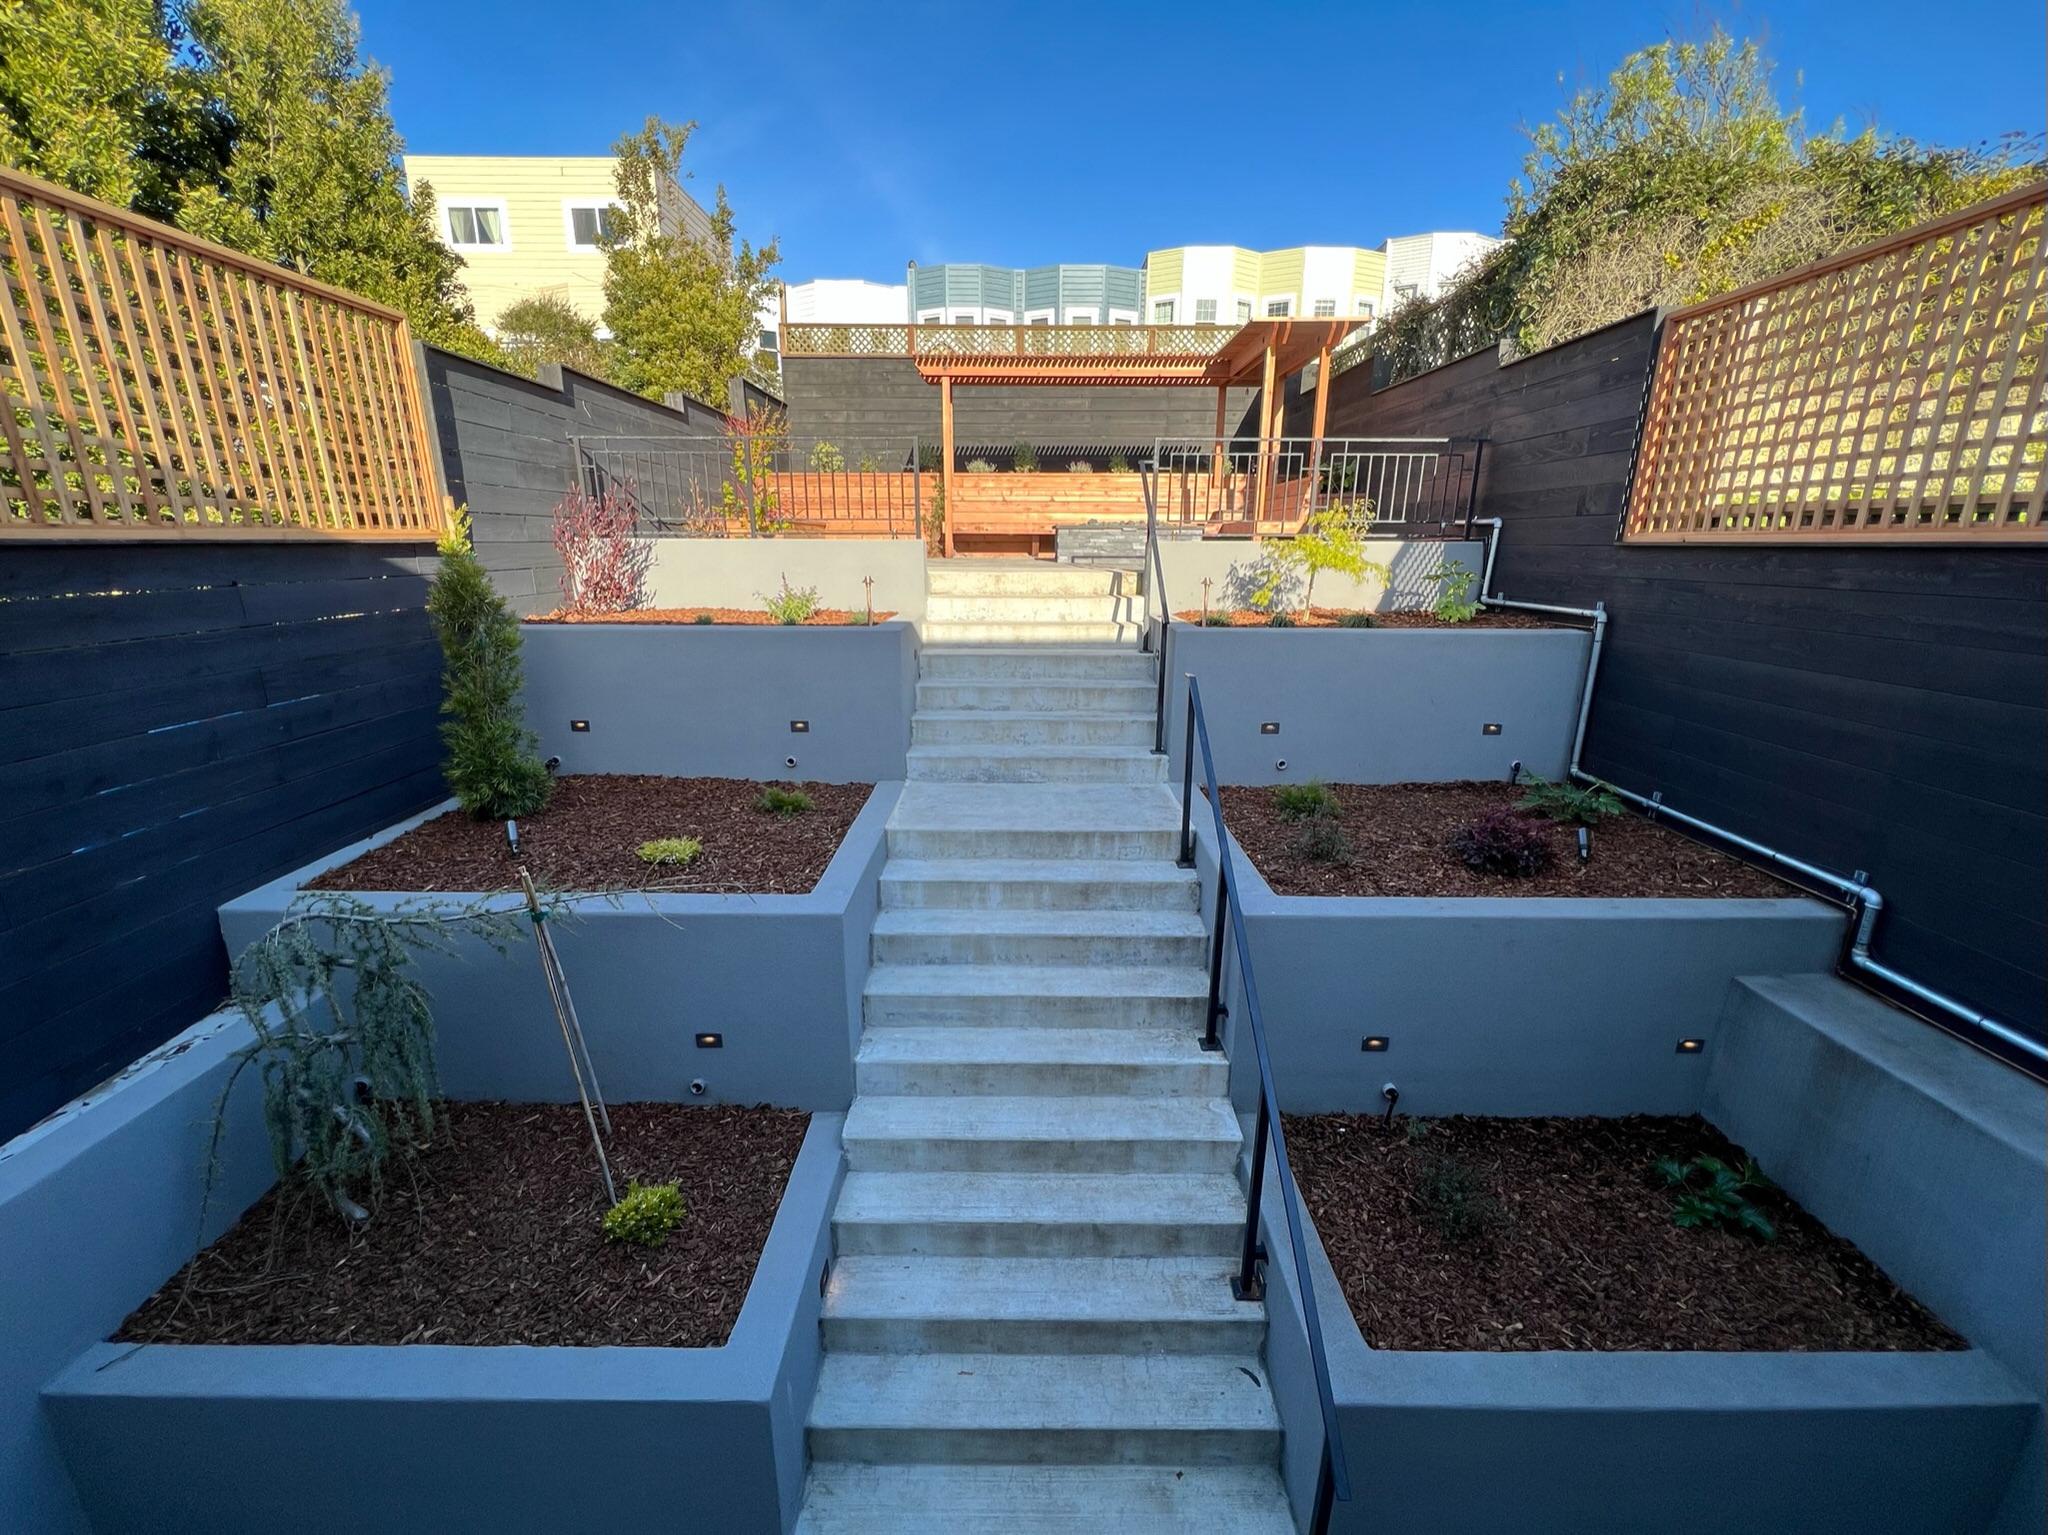 Completed backyard at our Outer Sunset, San Francisco project. Two tiered retaining walls on right and left side of stairway leading up to top level patio area. Two tiered retaining walls with plants. Top tier patio area with redwood bench and pergola above.